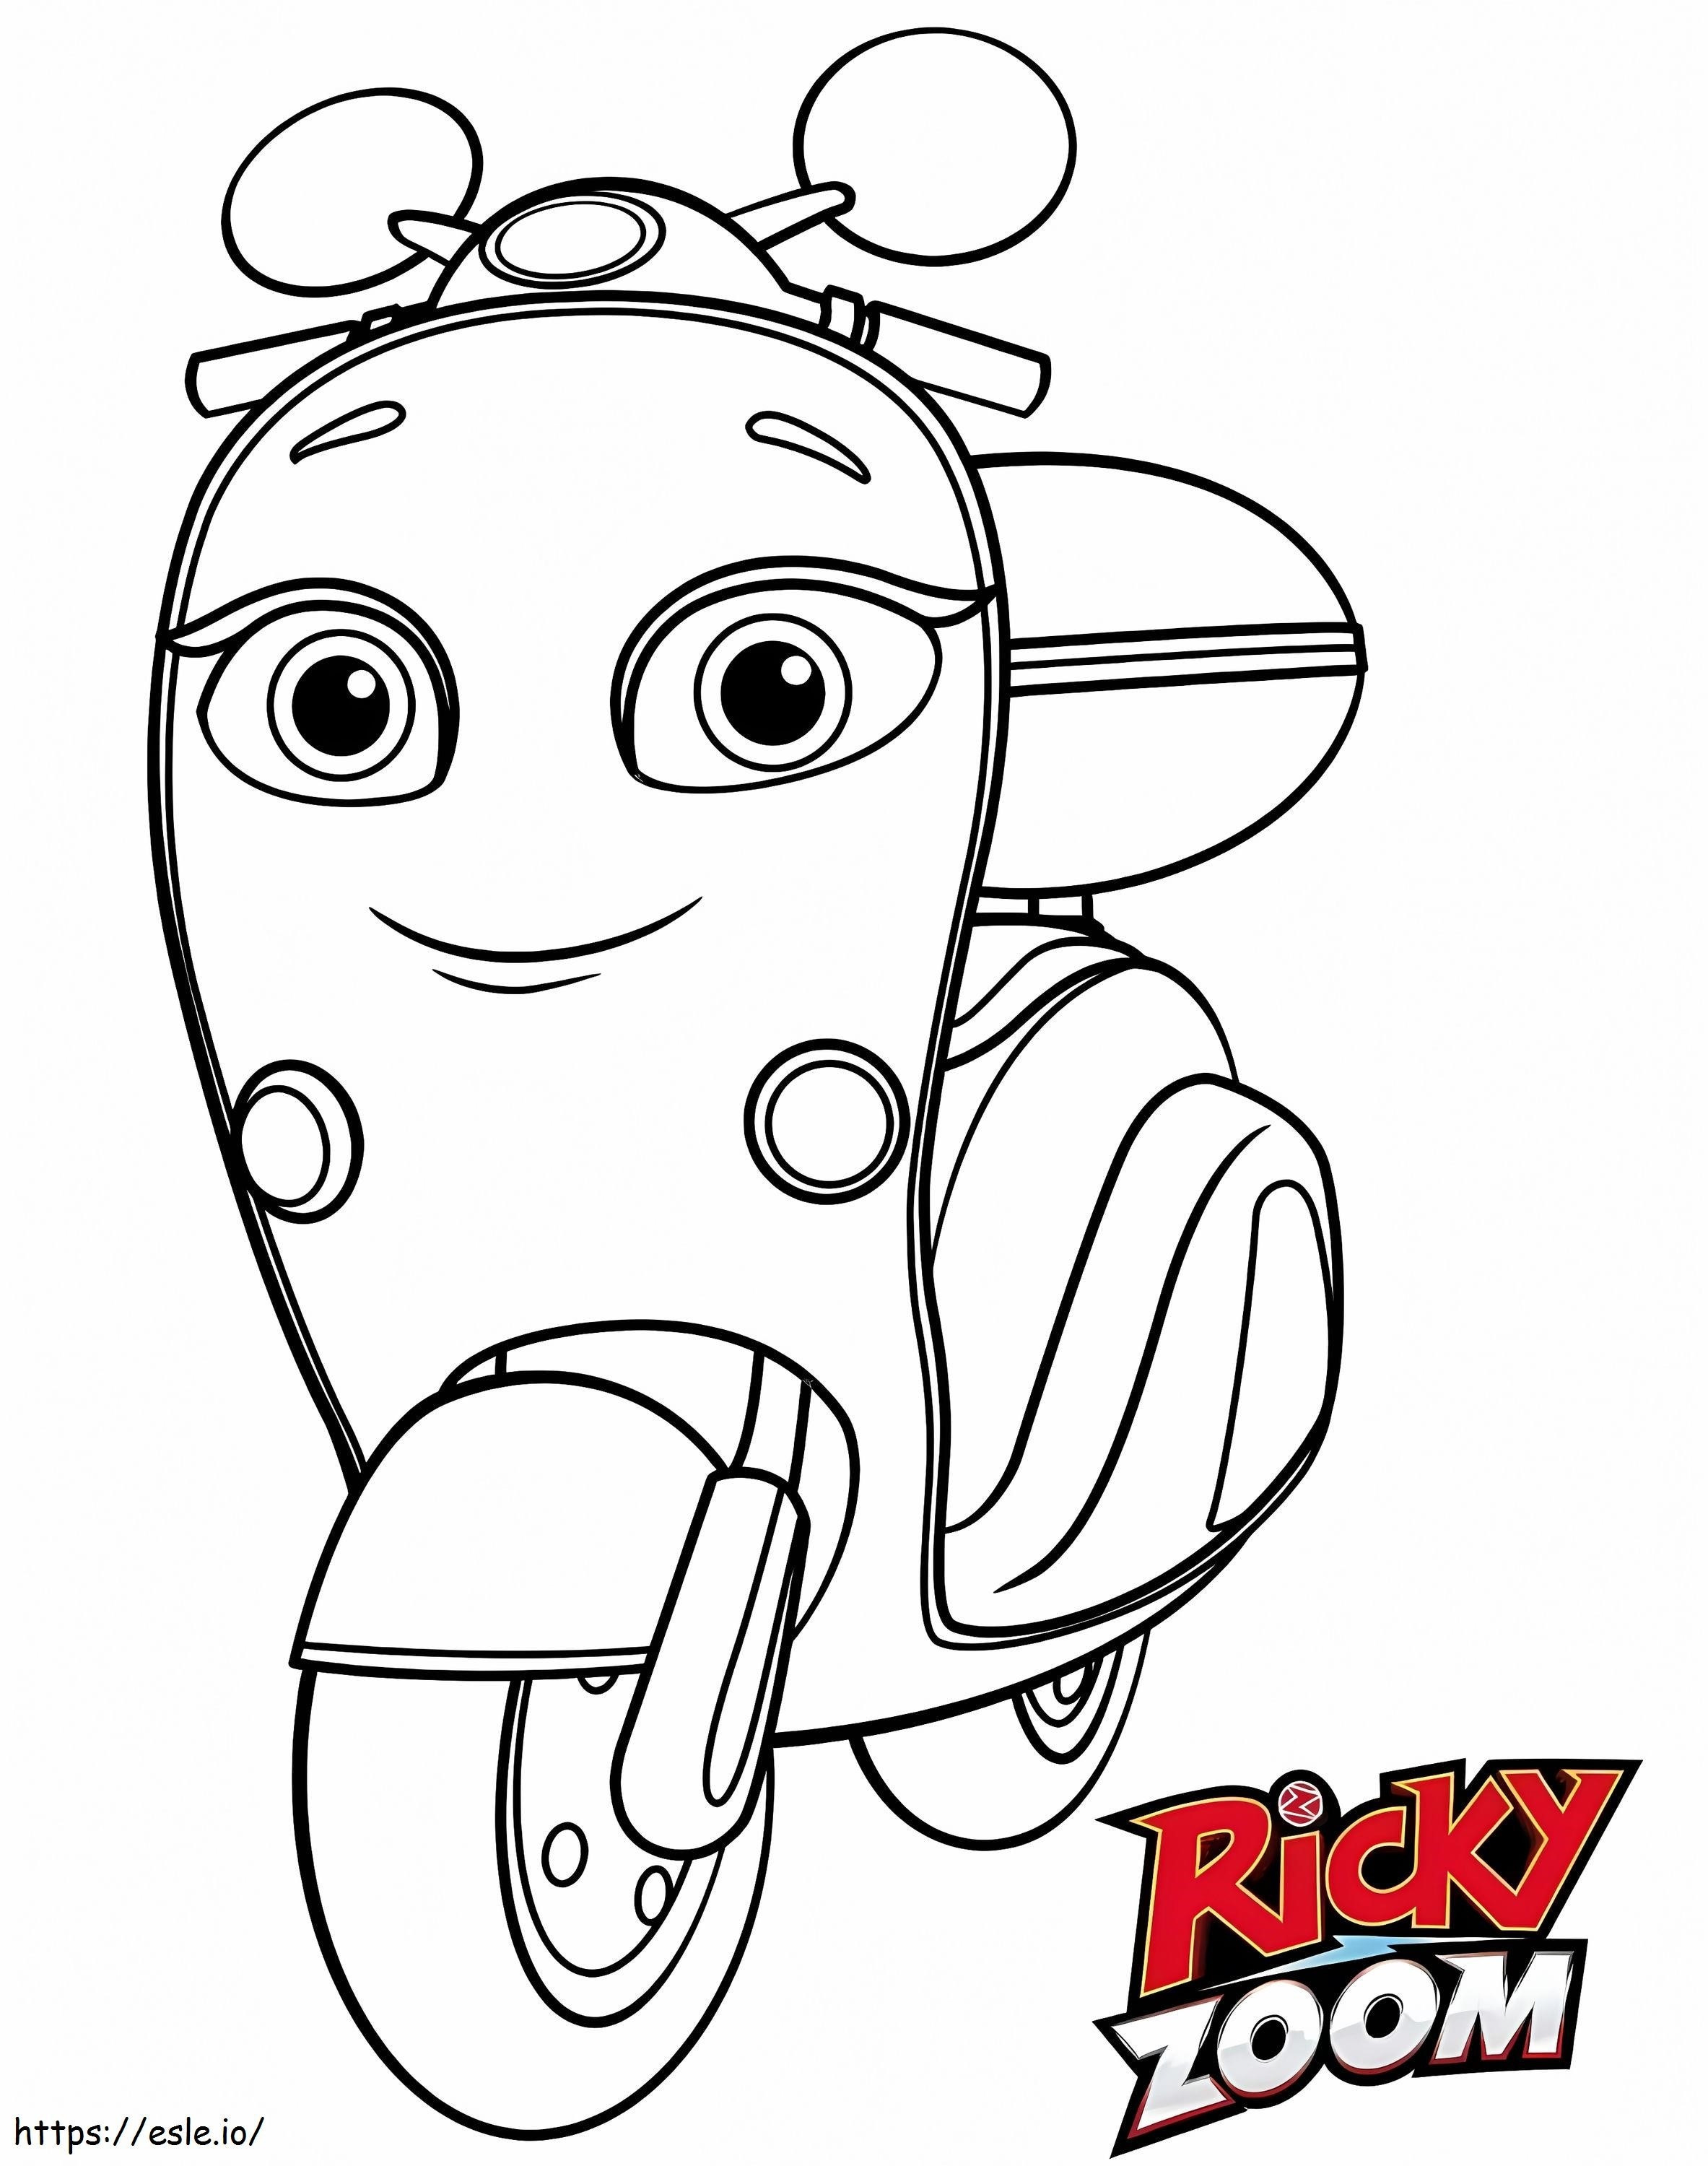 Sdgewtew coloring page